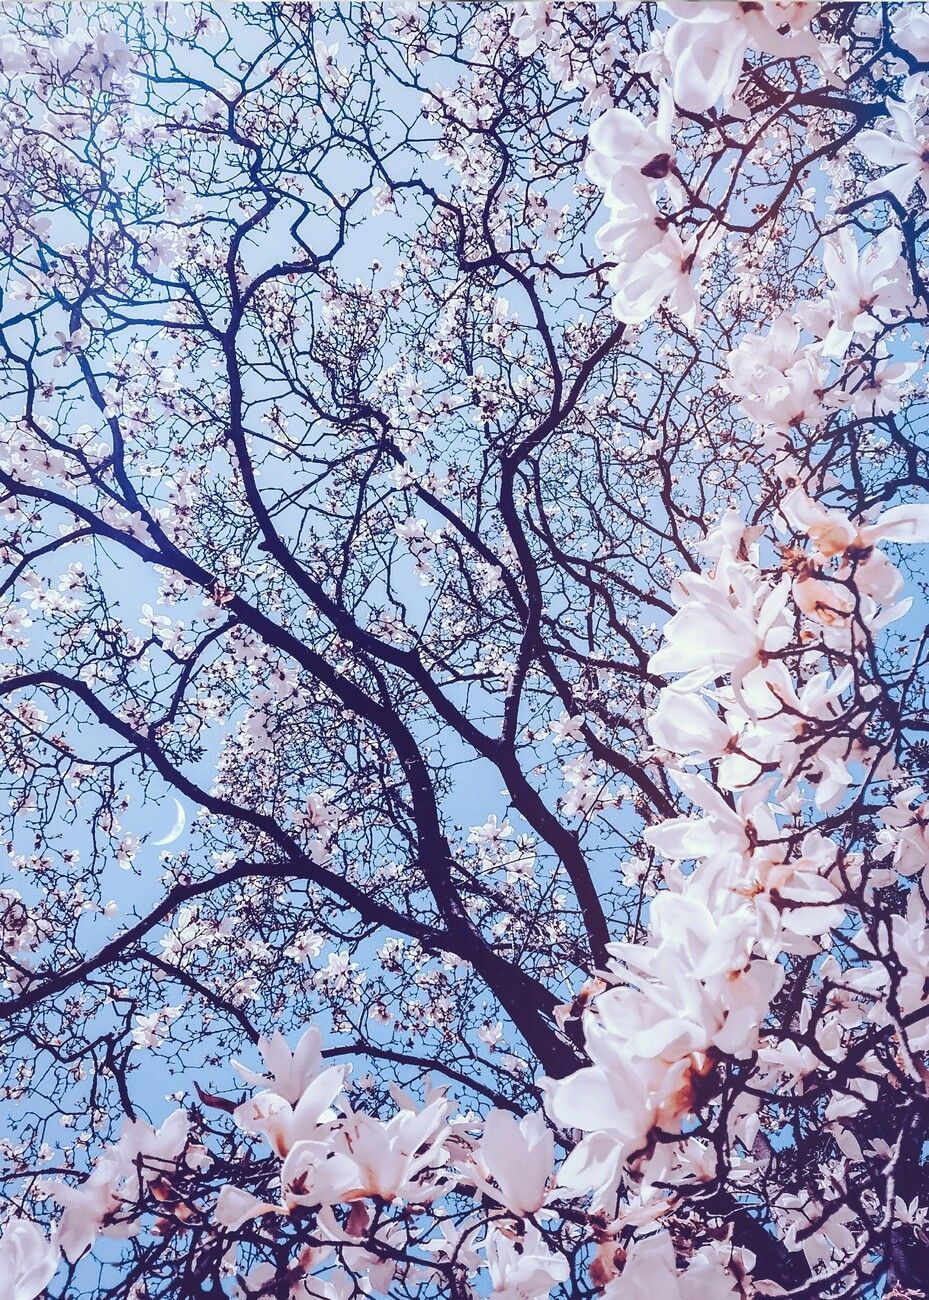 A tree with pink flowers in the sky - Photography, cherry blossom